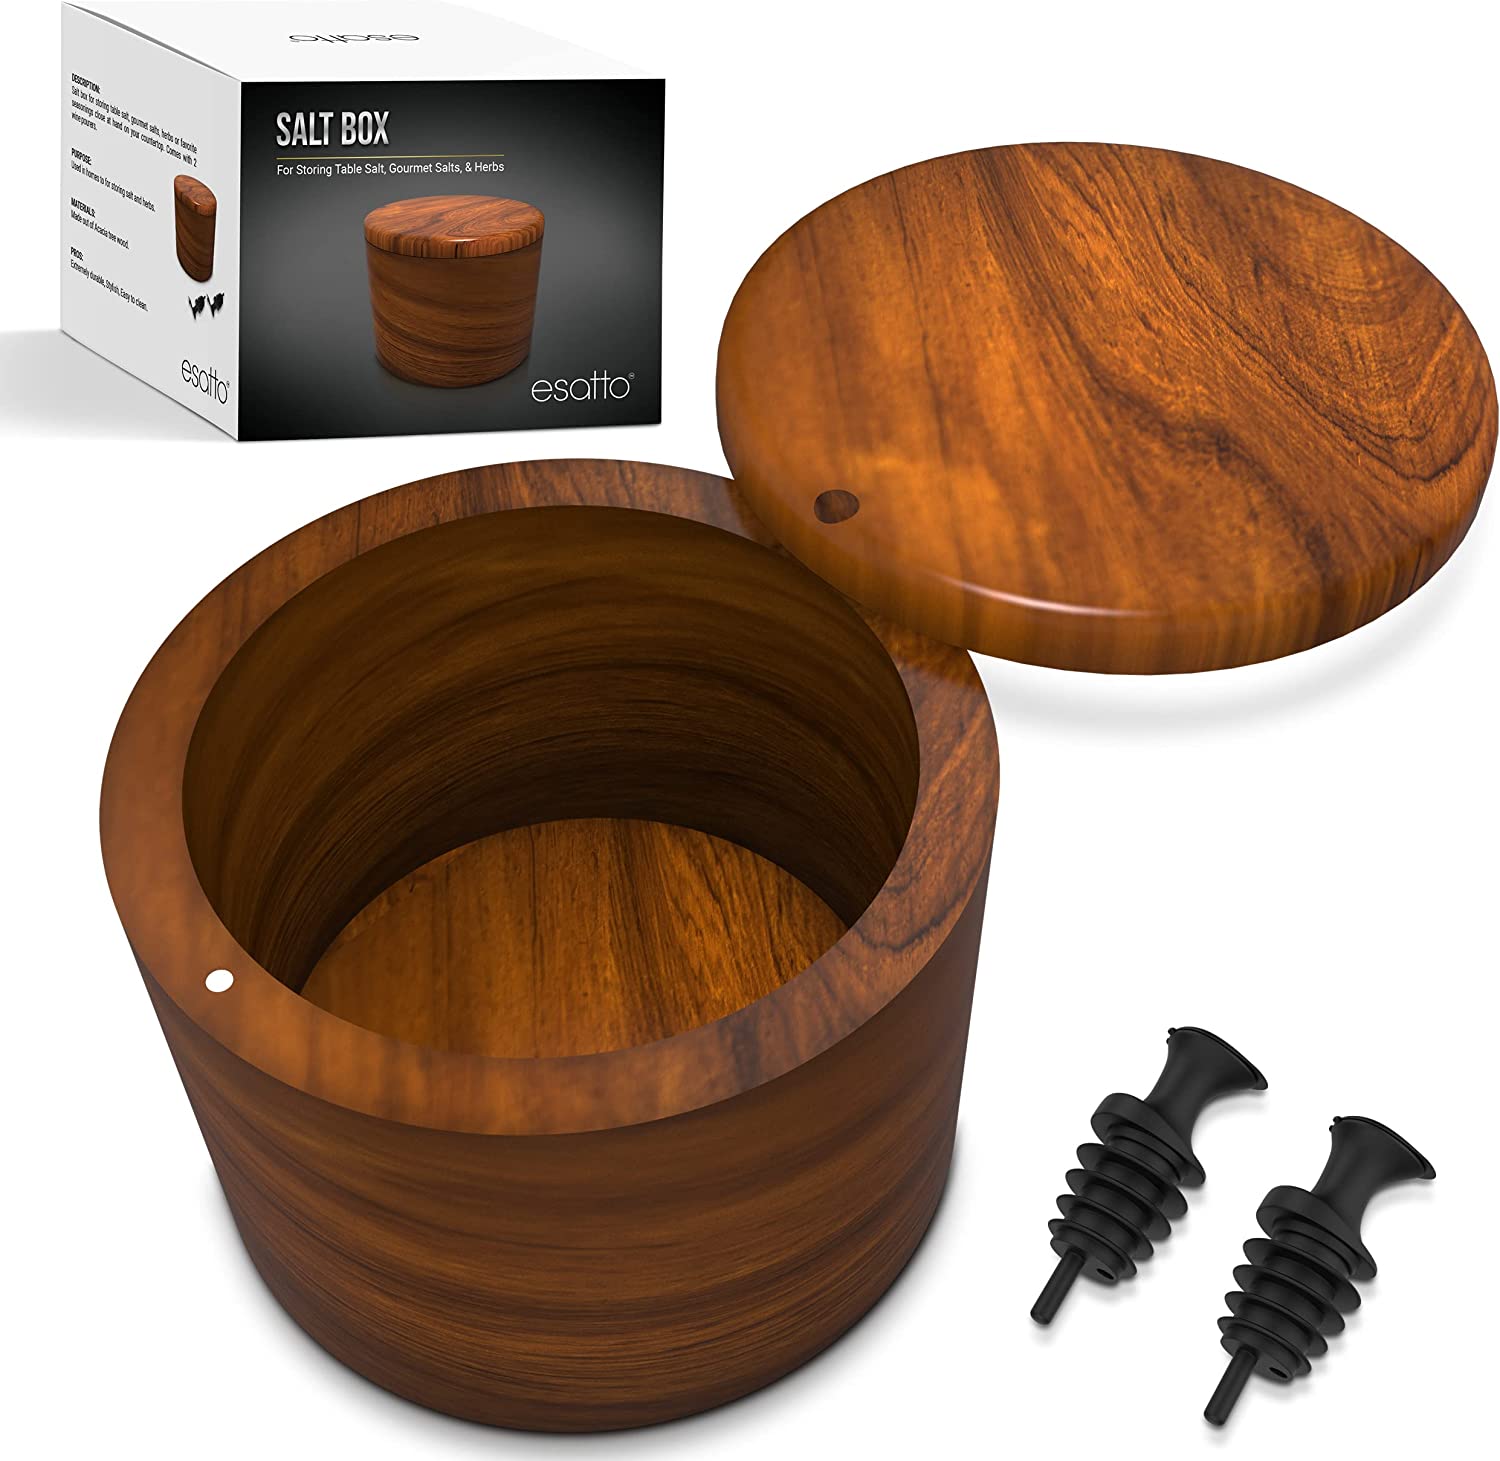 Featured image for “Esatto Round Acacia Wooden Salt Box, Magnetic Swivel Lid, Salt pepper or Spice Storage Box, 2 Wine Pourers Included”